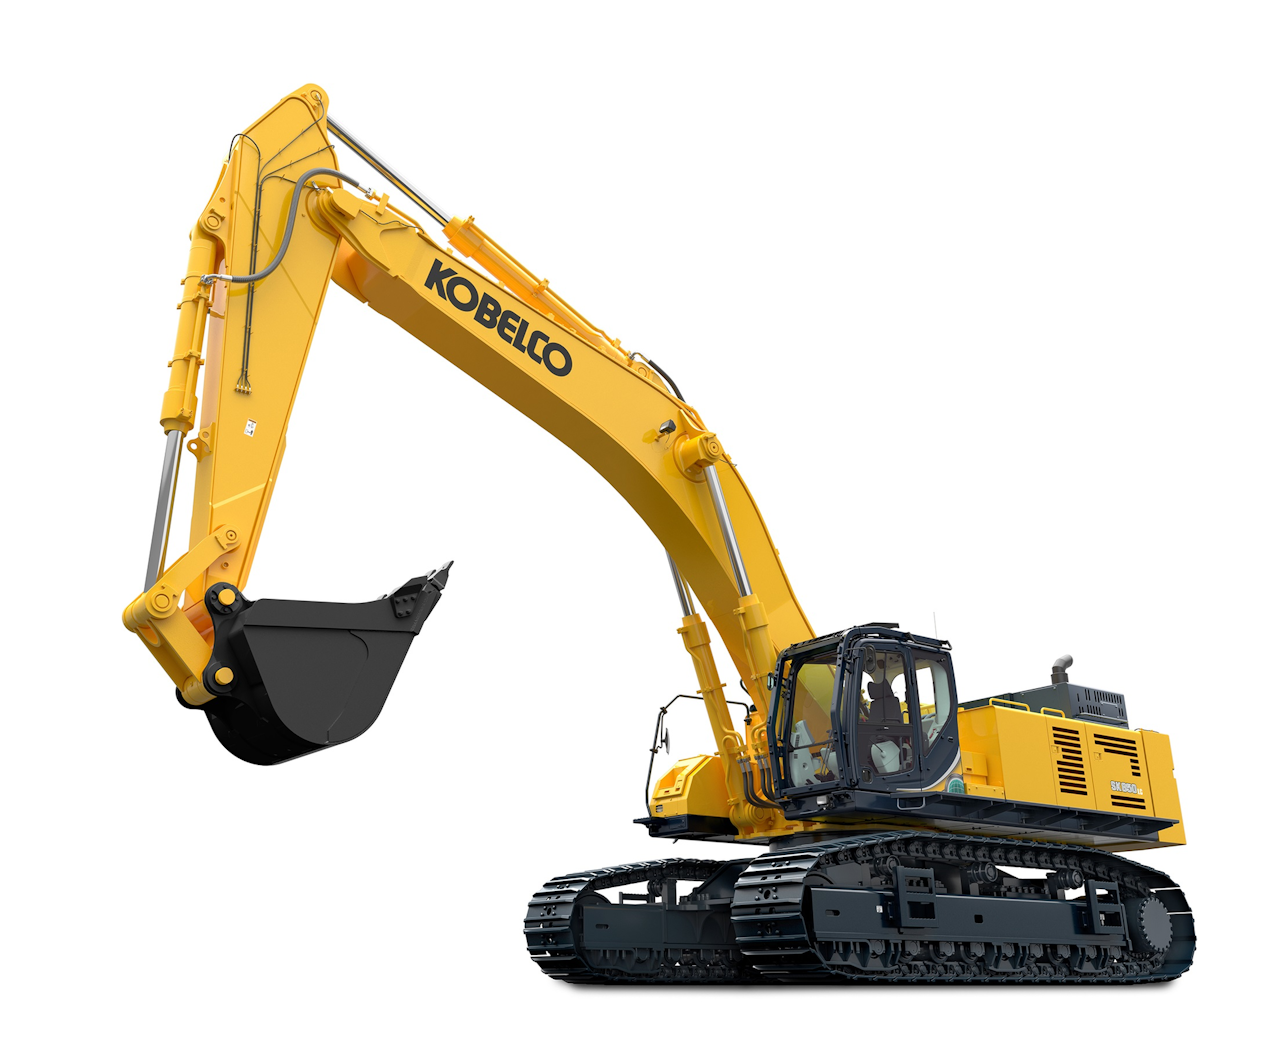 New KOBELCO SK850LC-10 Delivers Improved Power, Performance